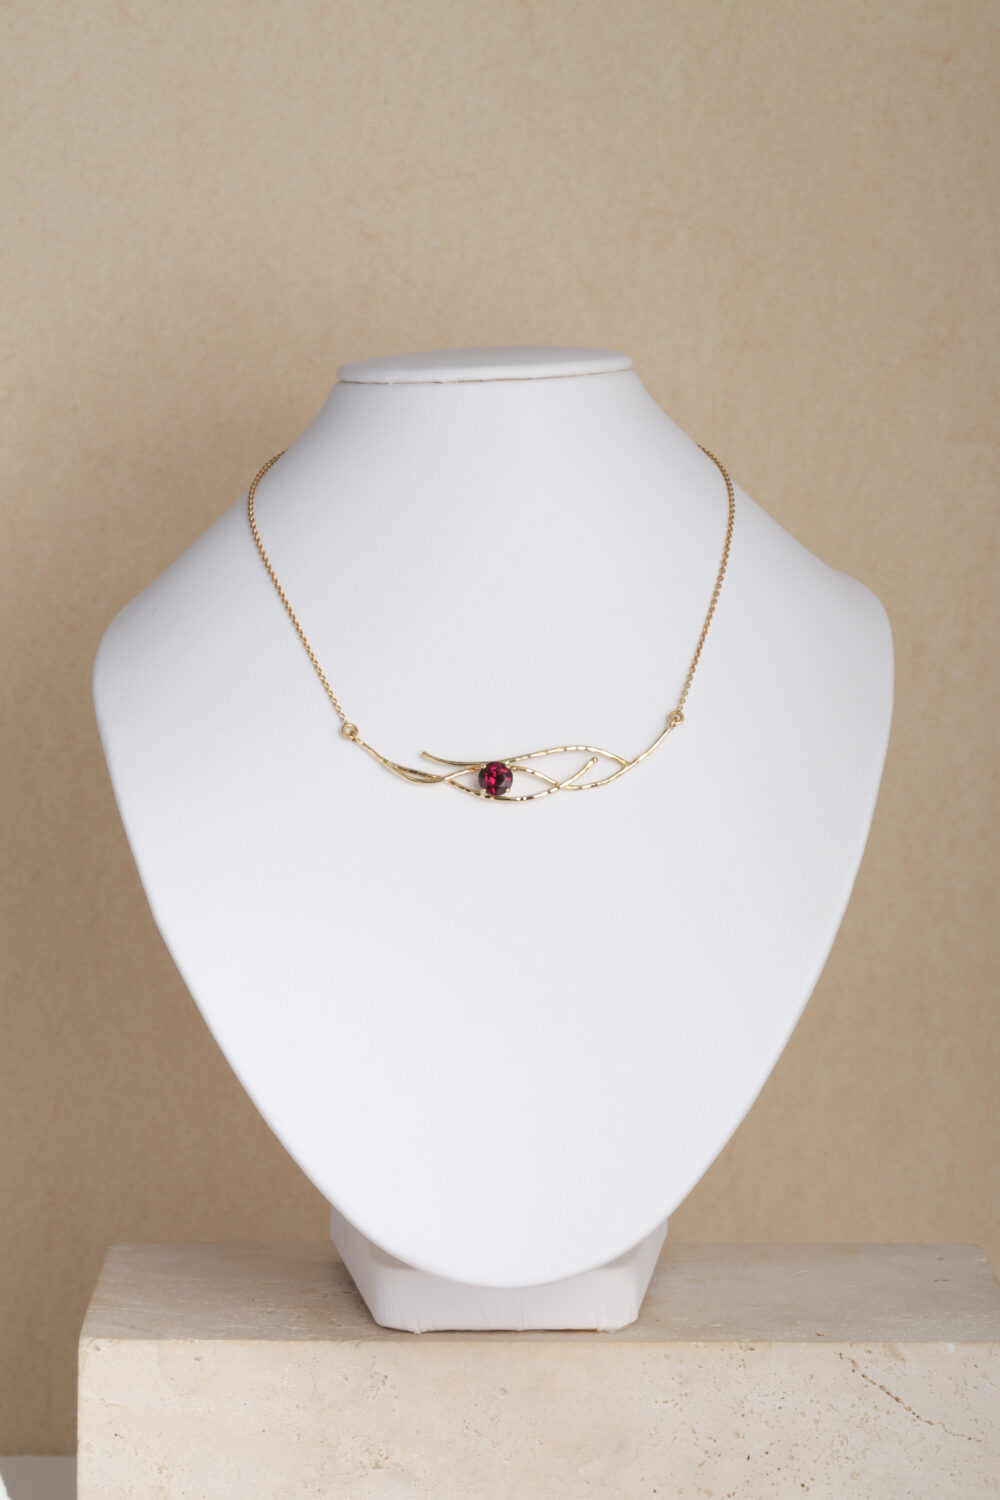 Necklace crafted from 18-karat gold set with a round cut garnet gemstone. All our jewellery is handmade by jewellery designer Pascale Masselis in our Antwerp based atelier.